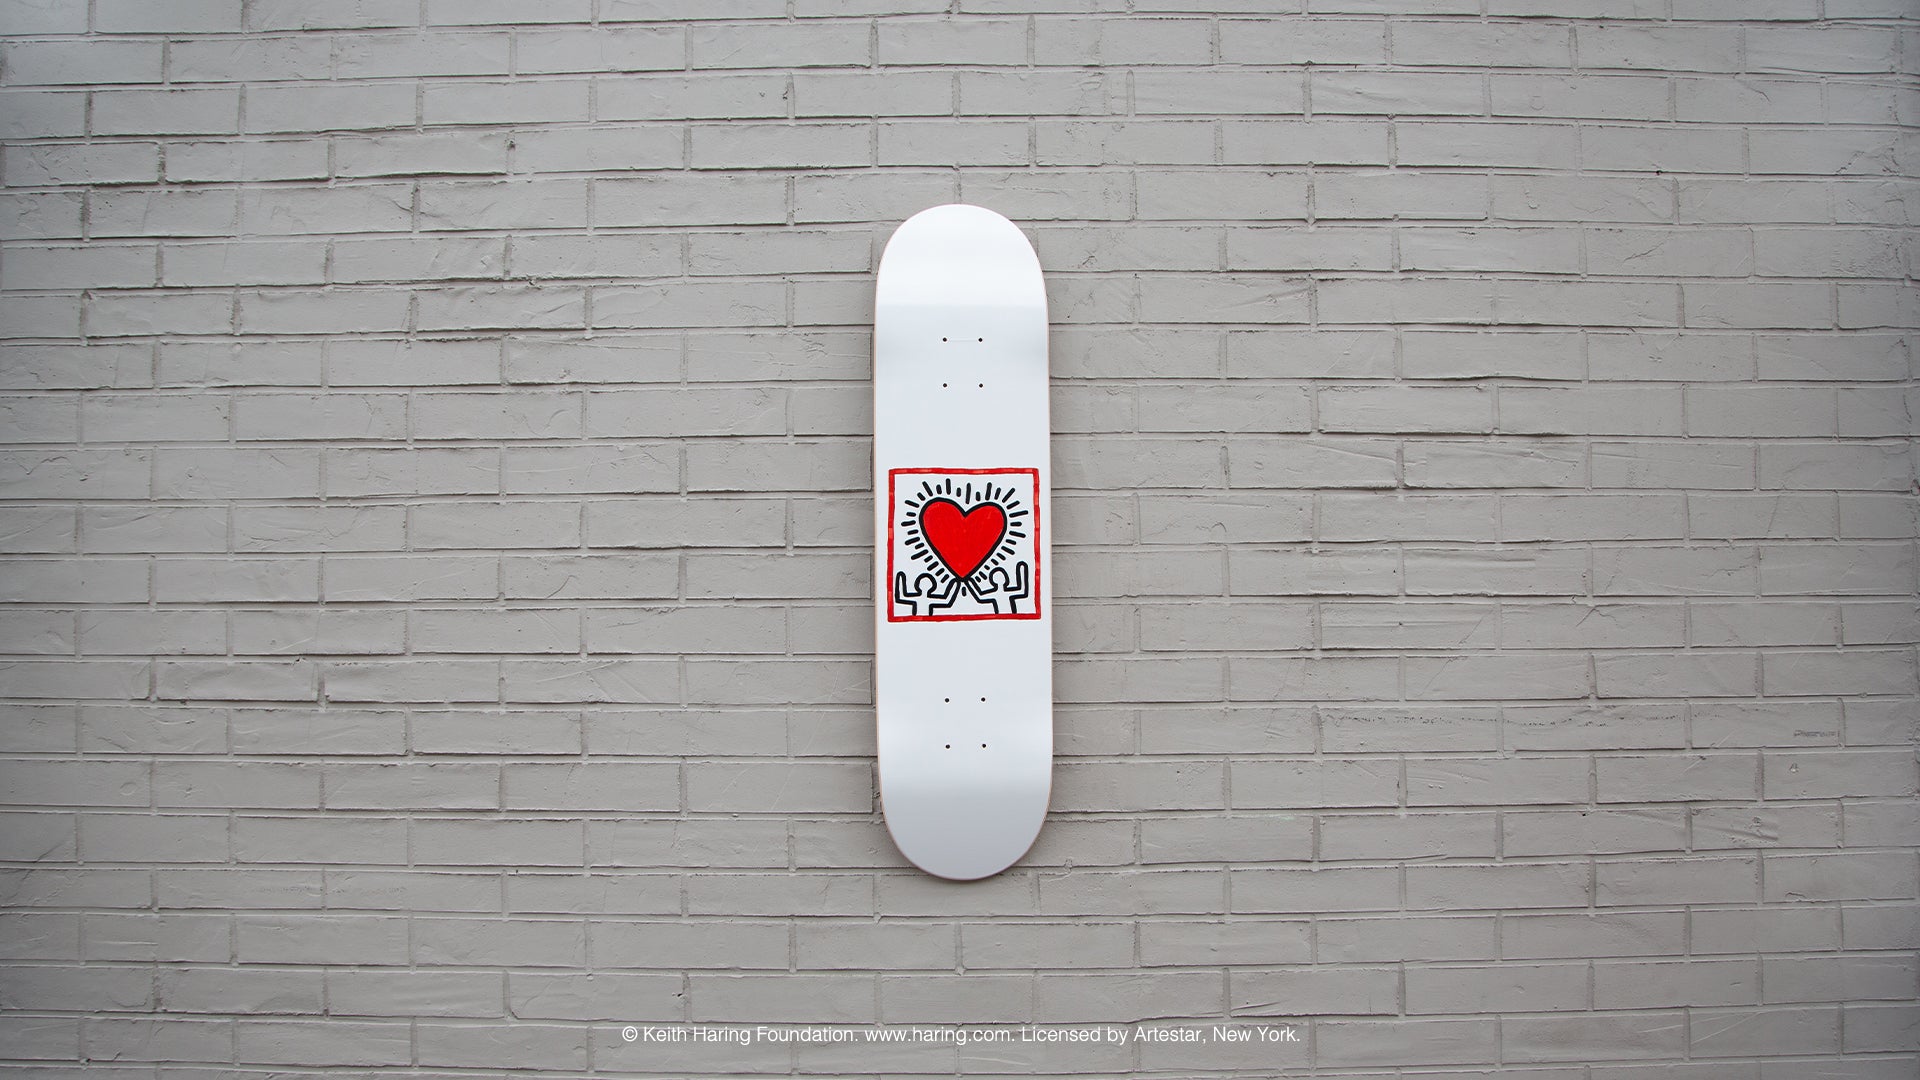 keith haring wall art on a skate deck